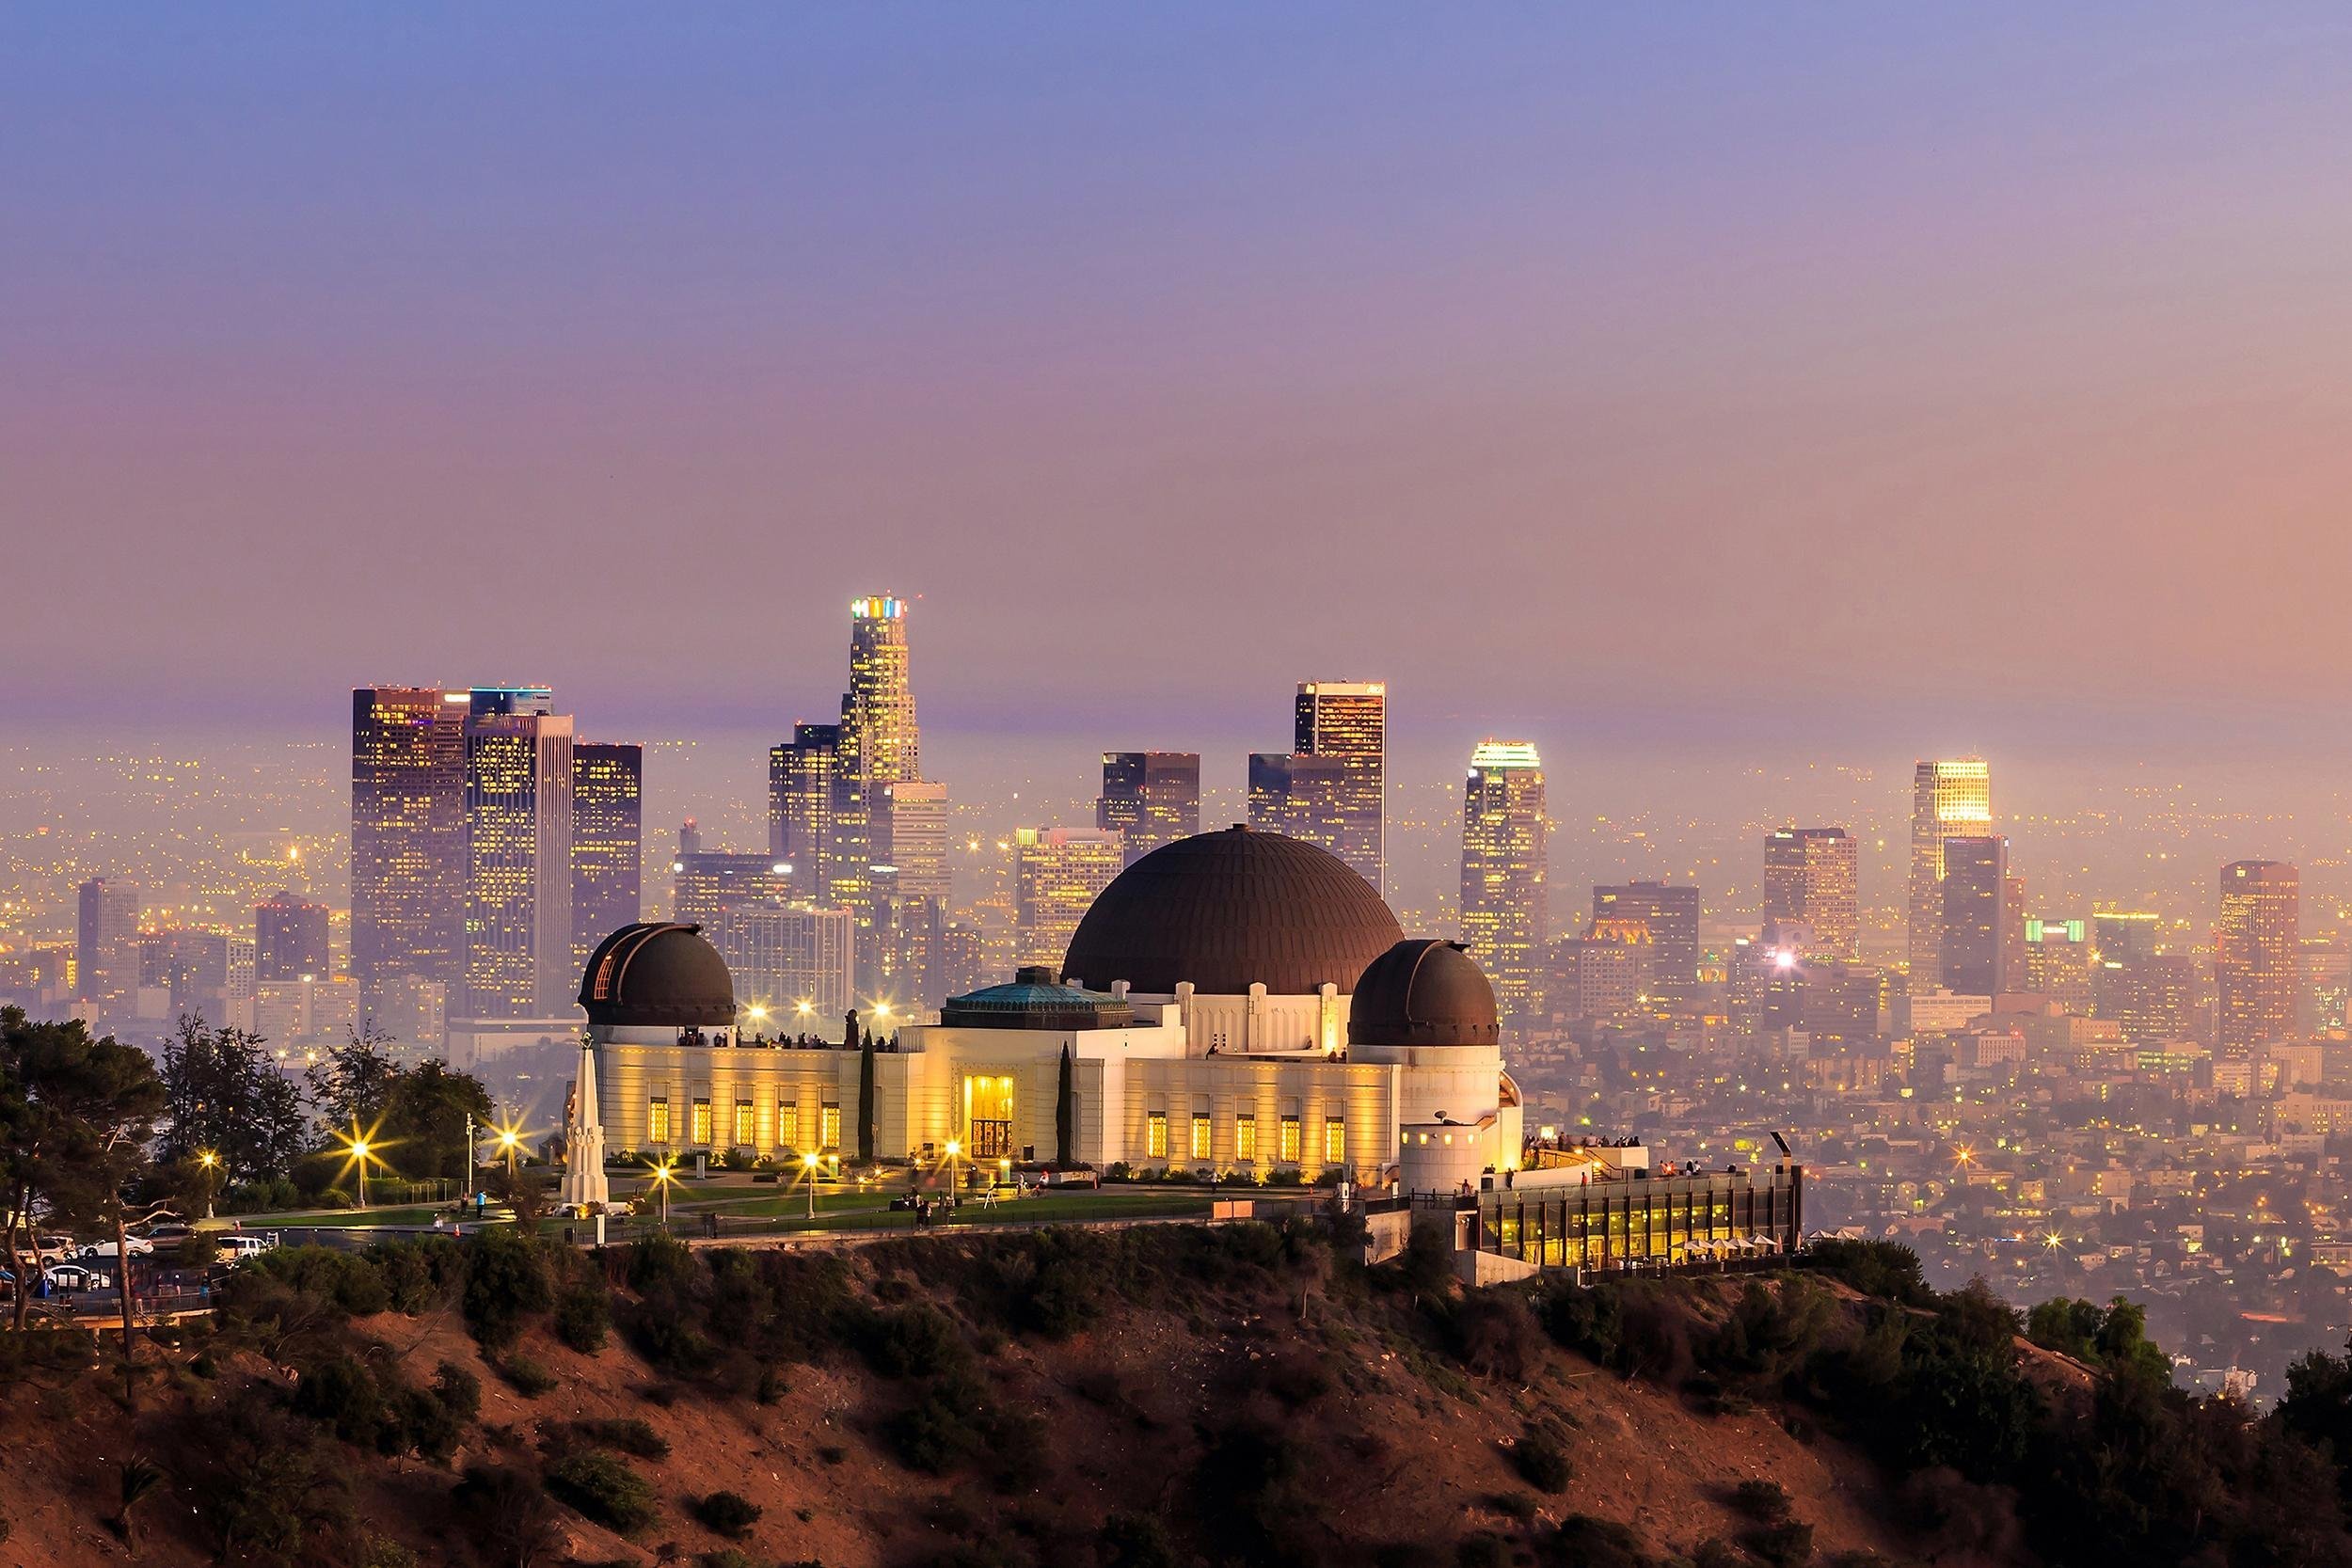 <p>There's no shortage of fun things to do or places to be seen in Los Angeles. For a selfie that will stand out, head to the amazing Griffith Observatory, located in one of <a href="https://blog.cheapism.com/best-urban-parks-16419/">America’s best urban parks</a>. Take a moment to enjoy the view, then turn around and get a photo of yourself with the skyline or the Hollywood sign in the background.</p>